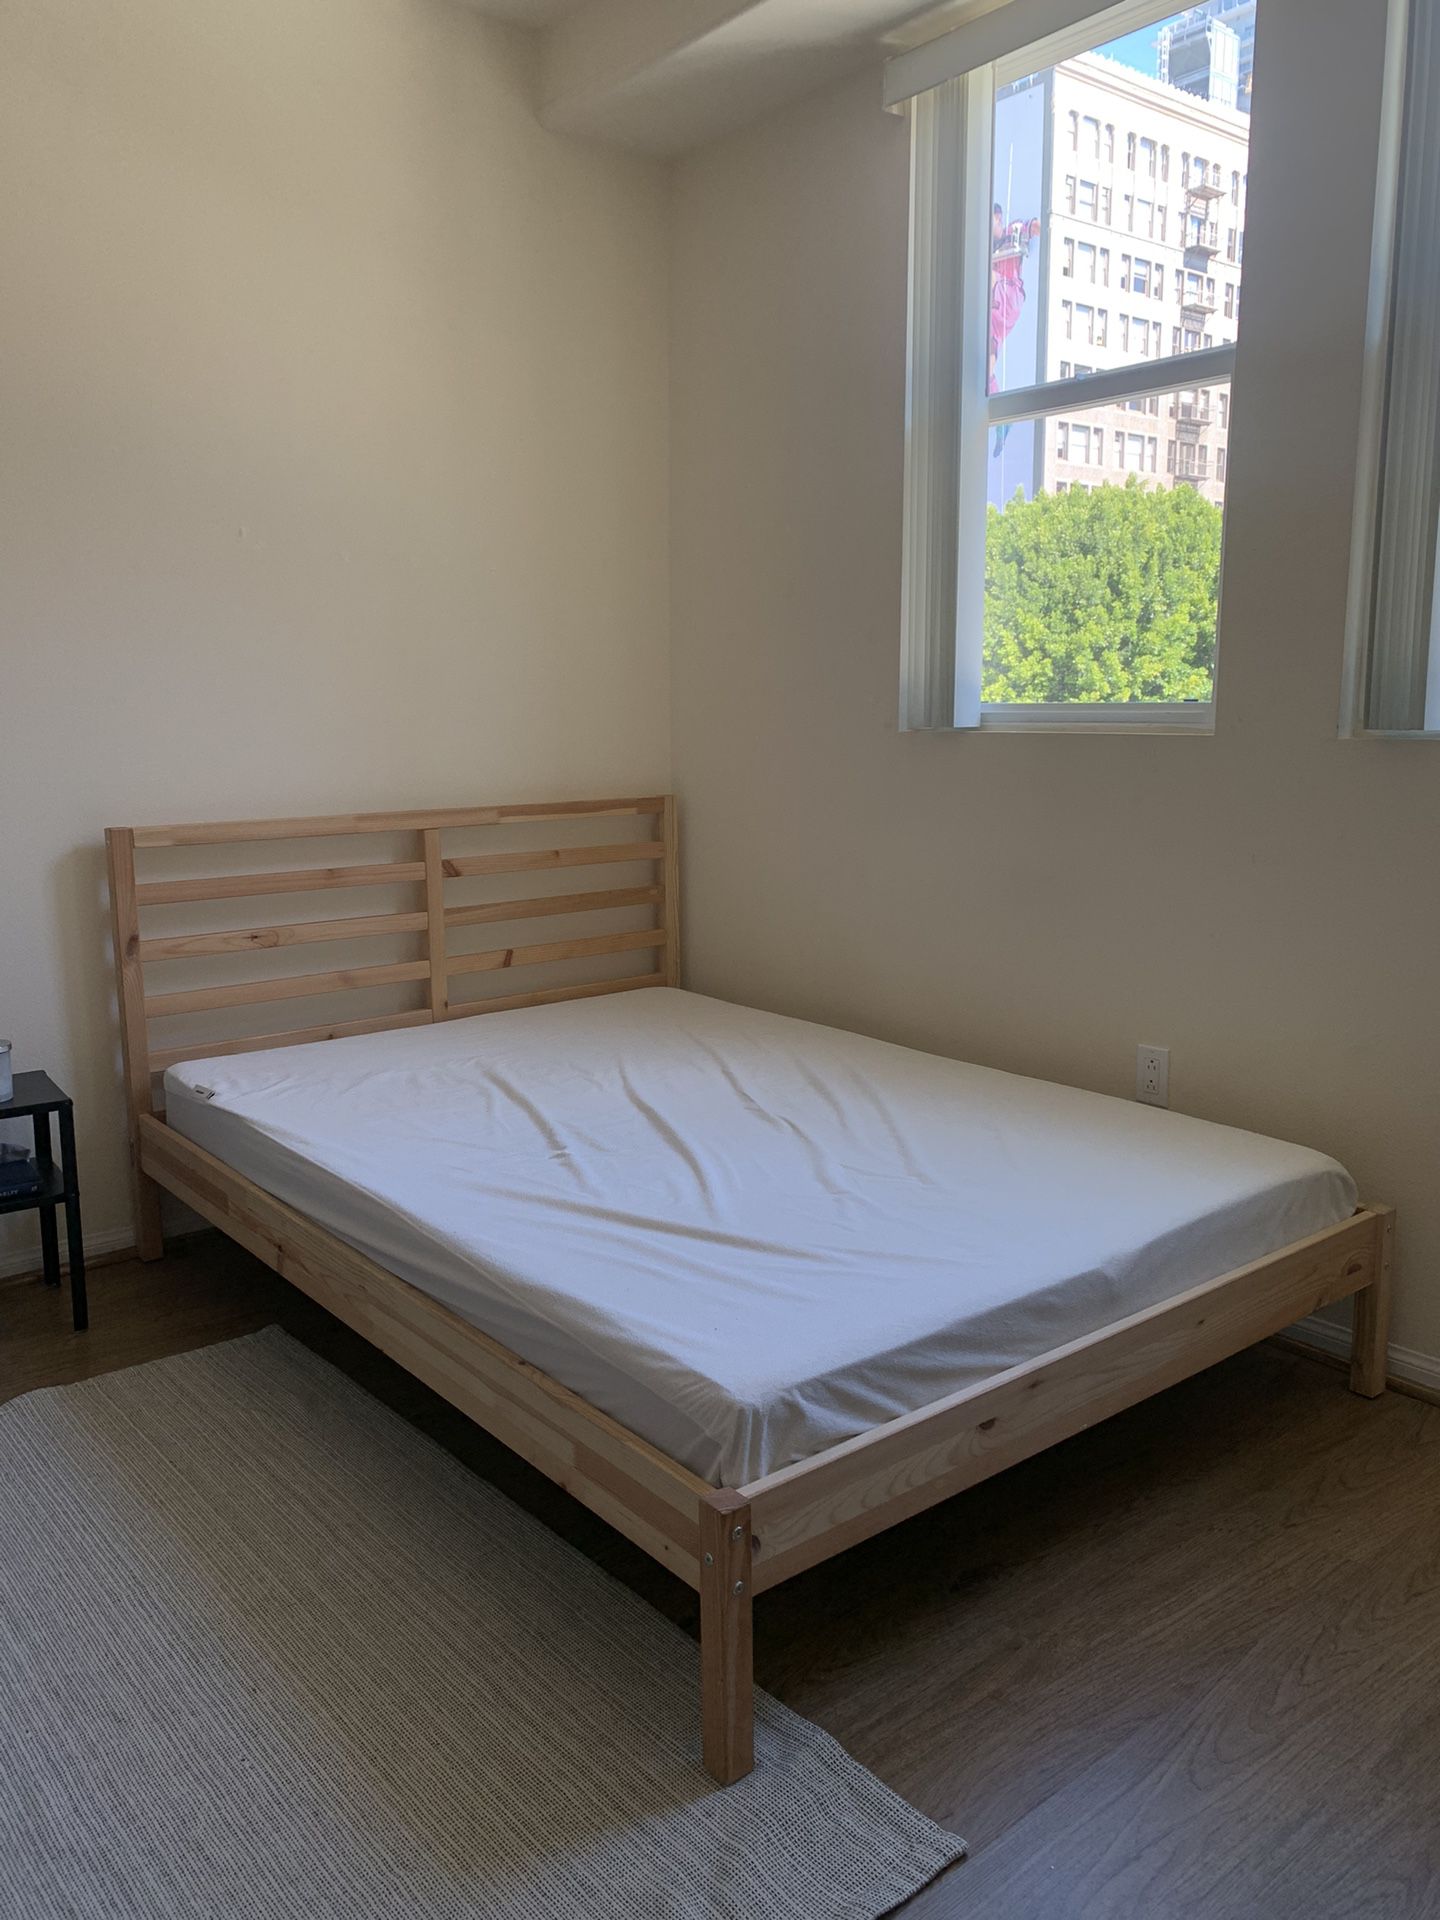 Selling an IKEA bed with mattress